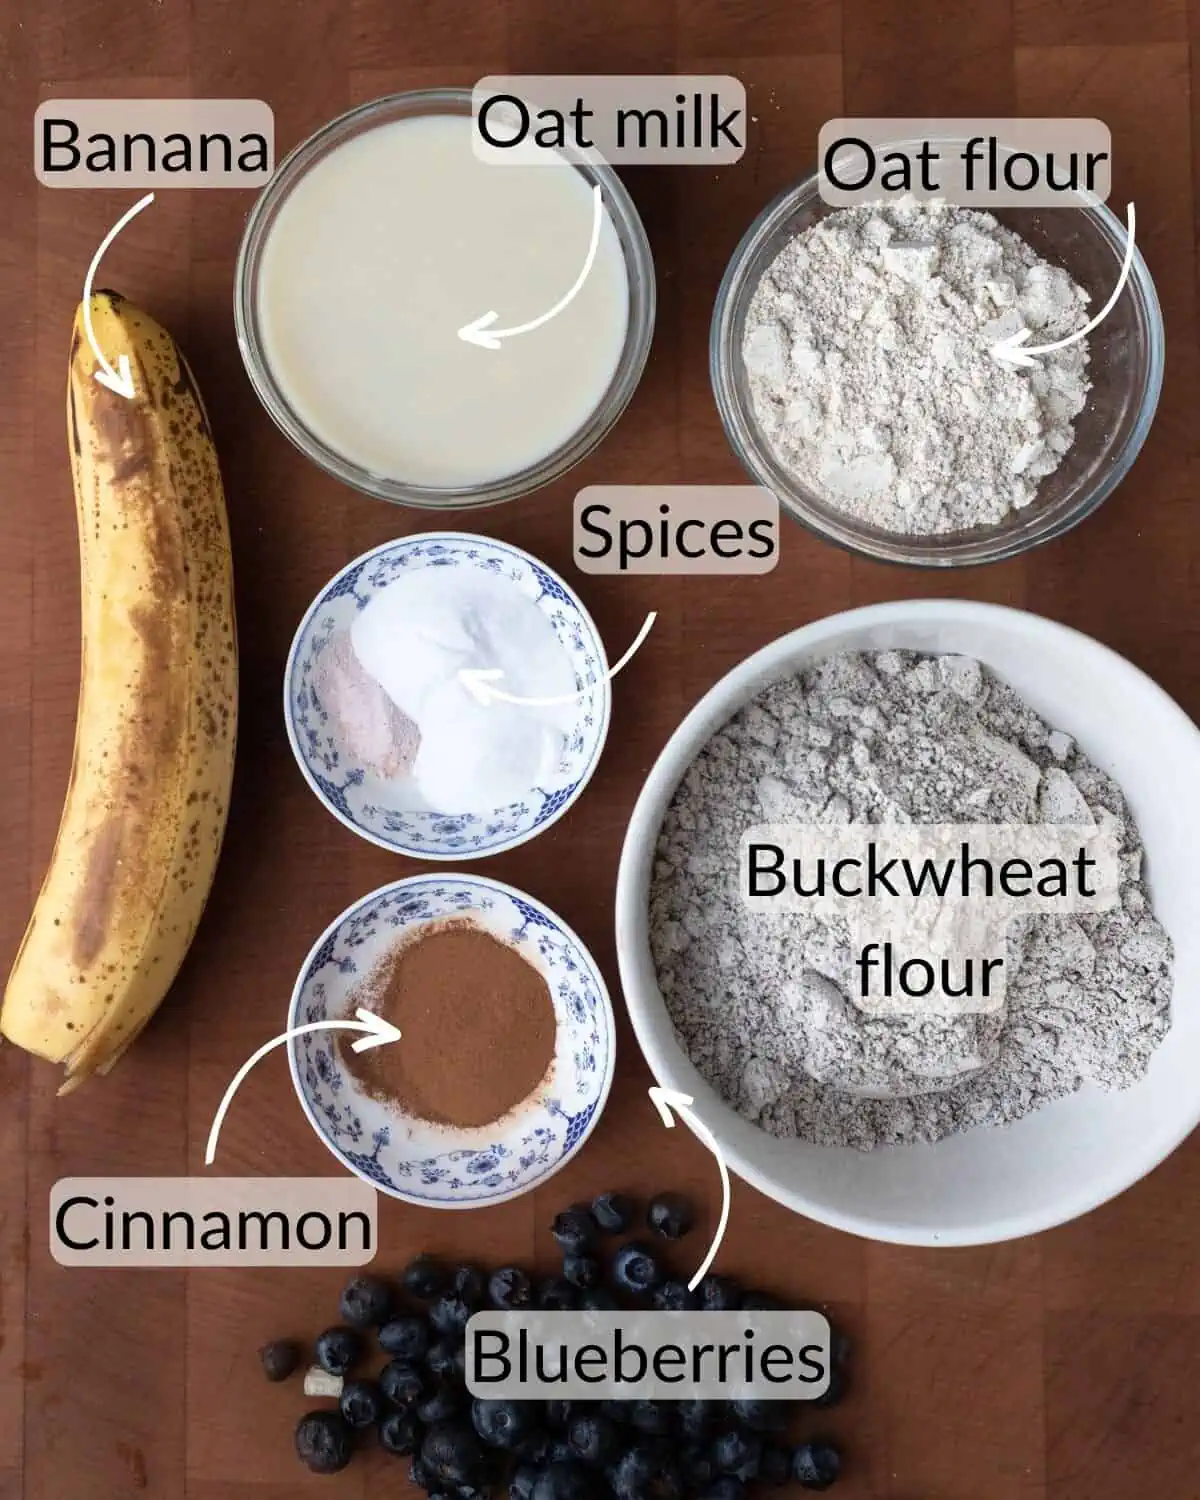 Image of the ingredients to make easy egg free pancakes that are gluten-free and vegan. Image shows buckwheat flout, oat flour, oat milk, maple syrup, salt, baking soda, baking powser, blueberries, and bananas.